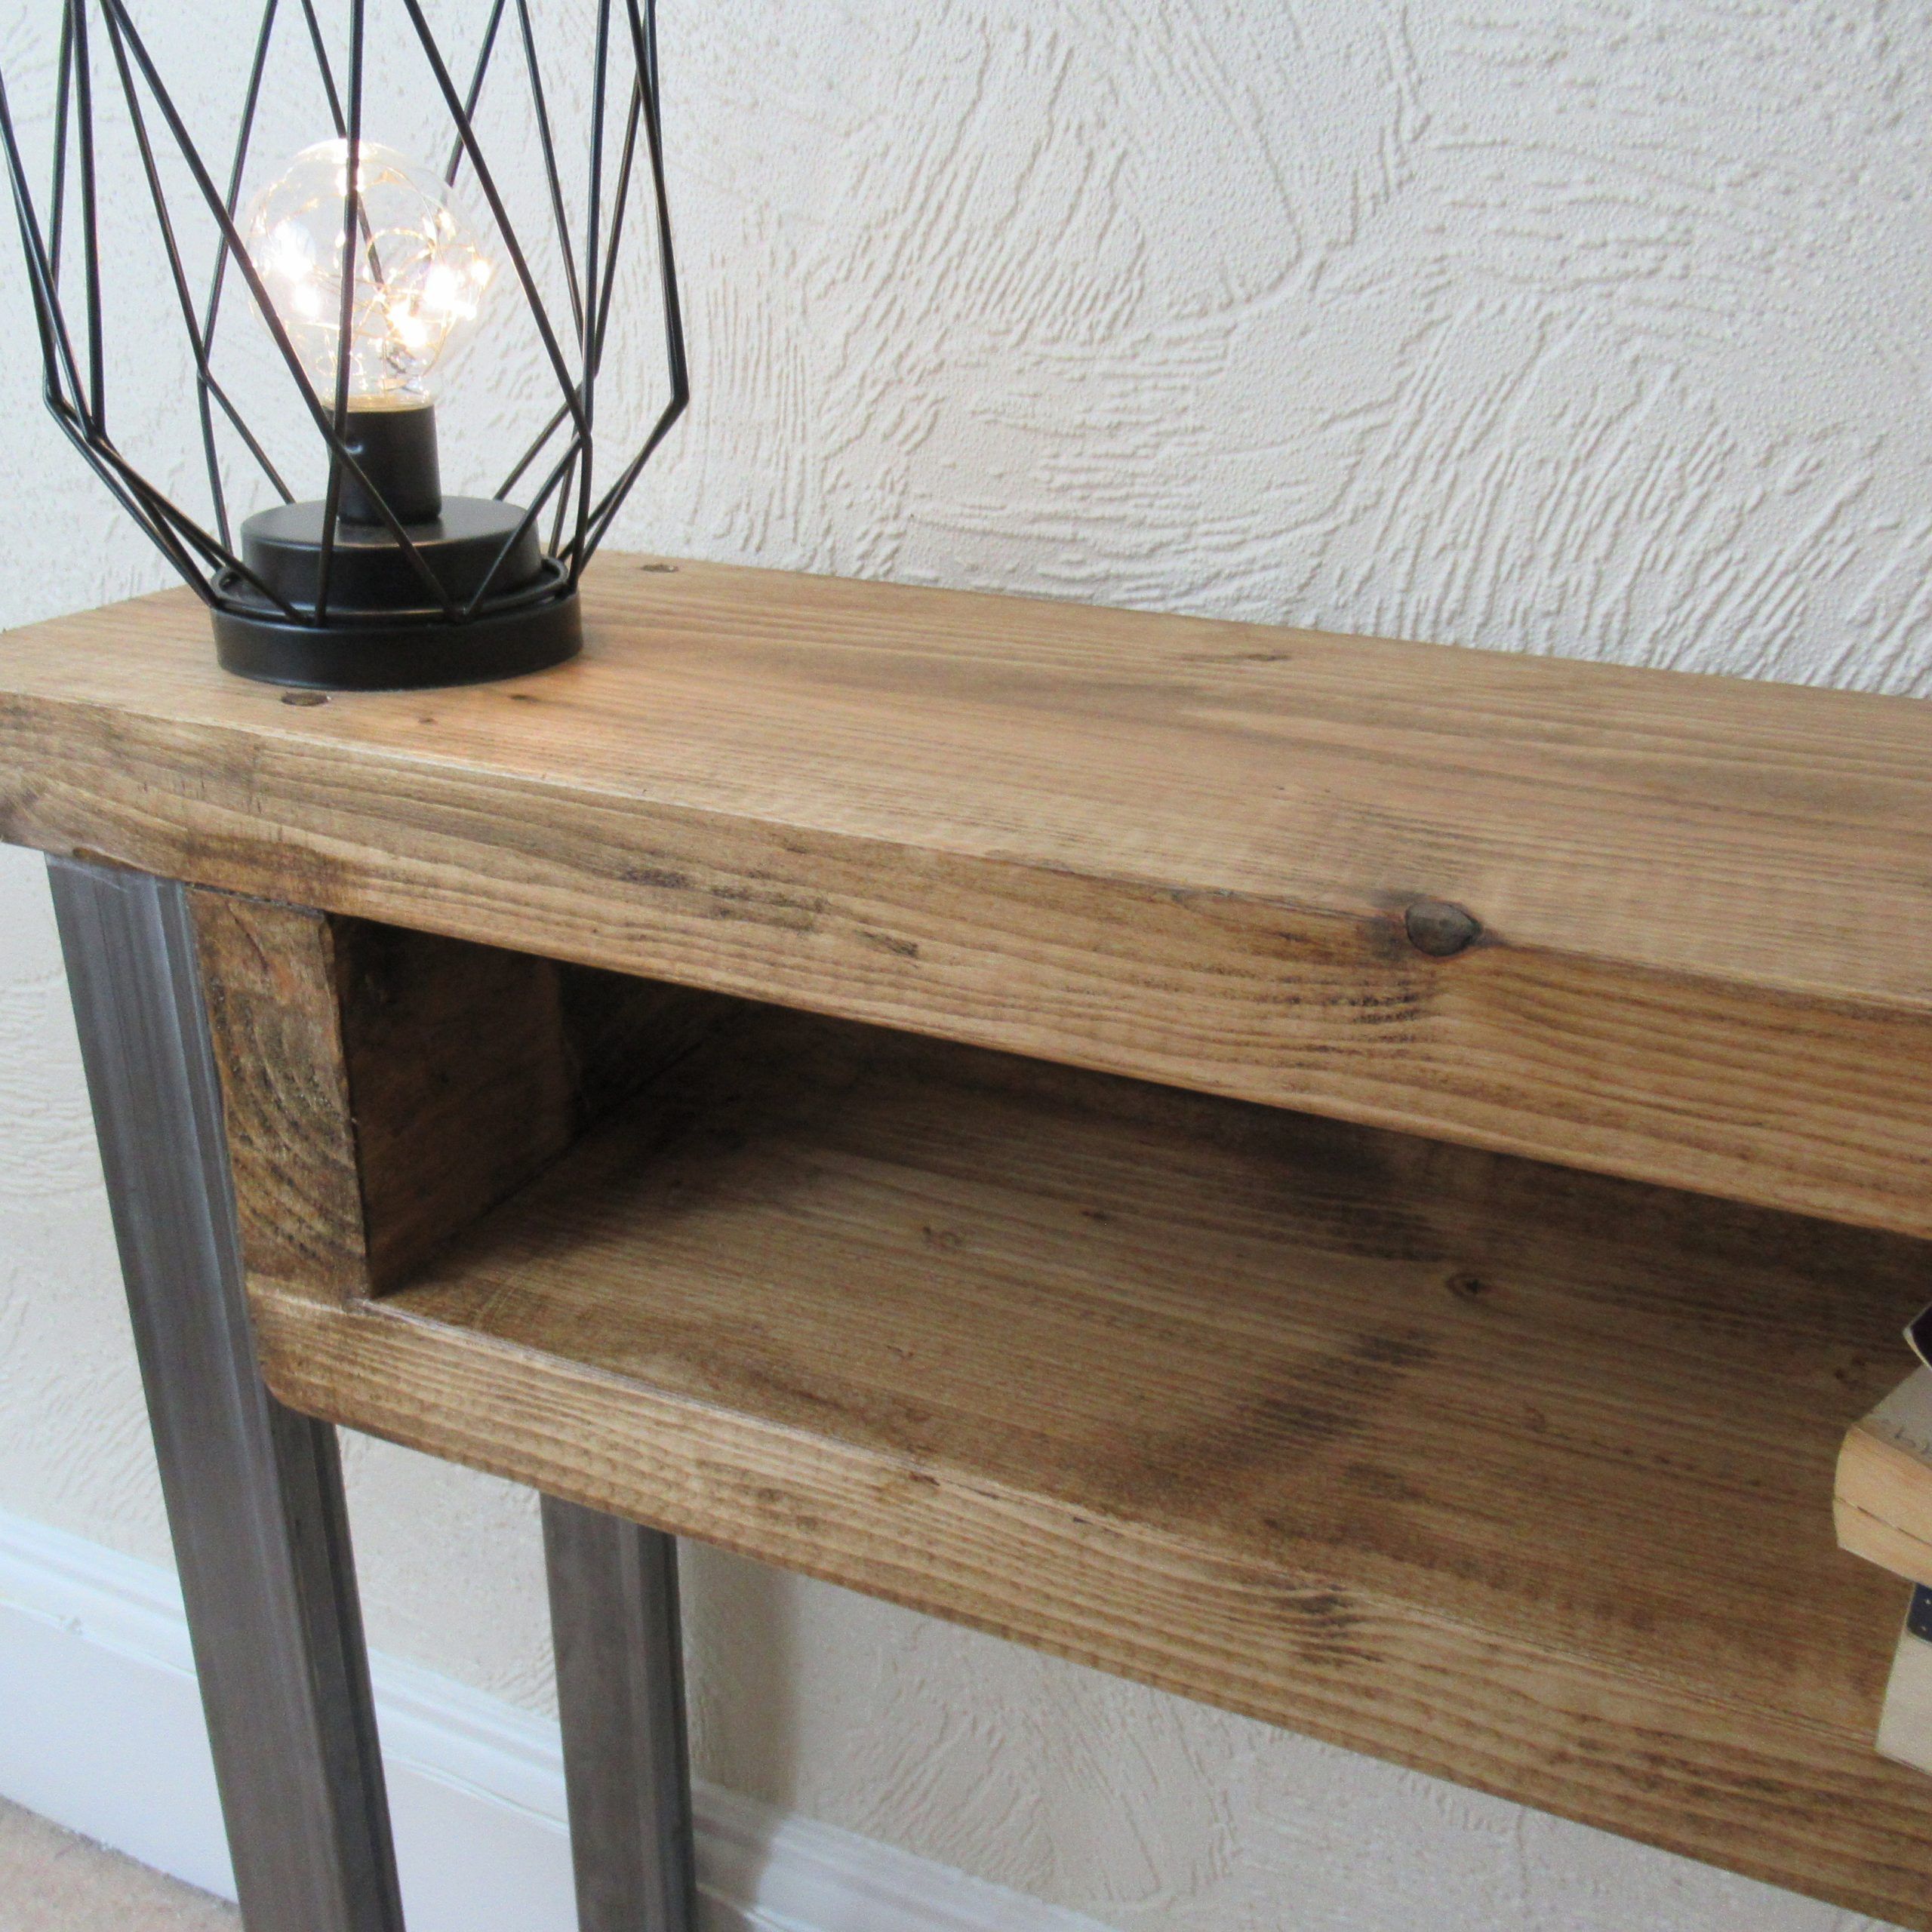 Hallway Console Table Chunky Wood Intended For Wood Console Tables (View 14 of 20)